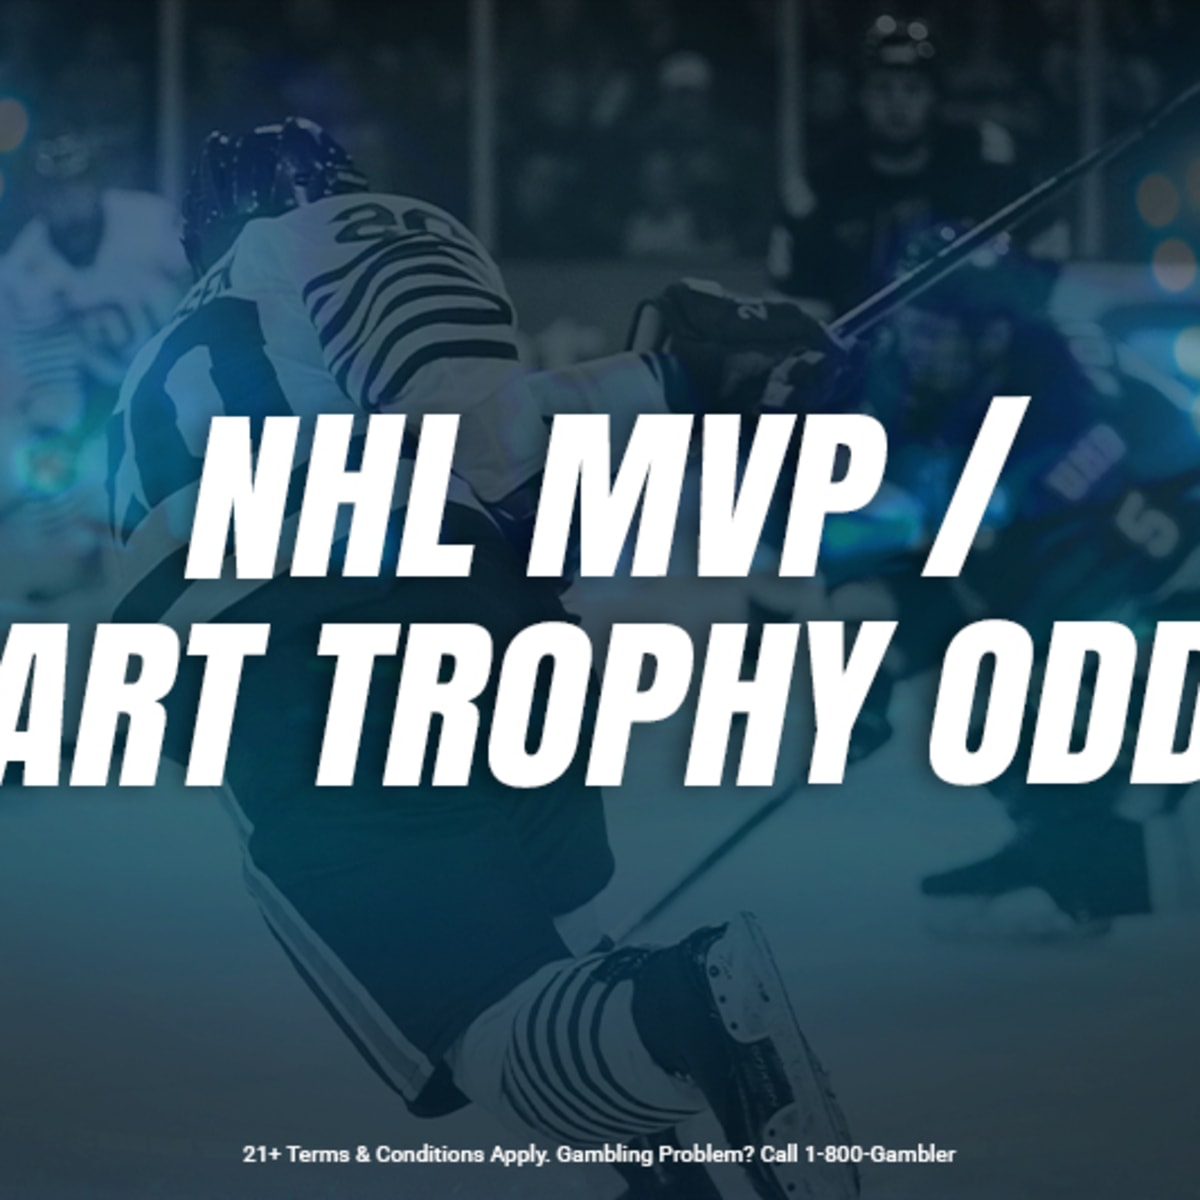 New Jersey forward Taylor Hall wins Hart Trophy as NHL MVP